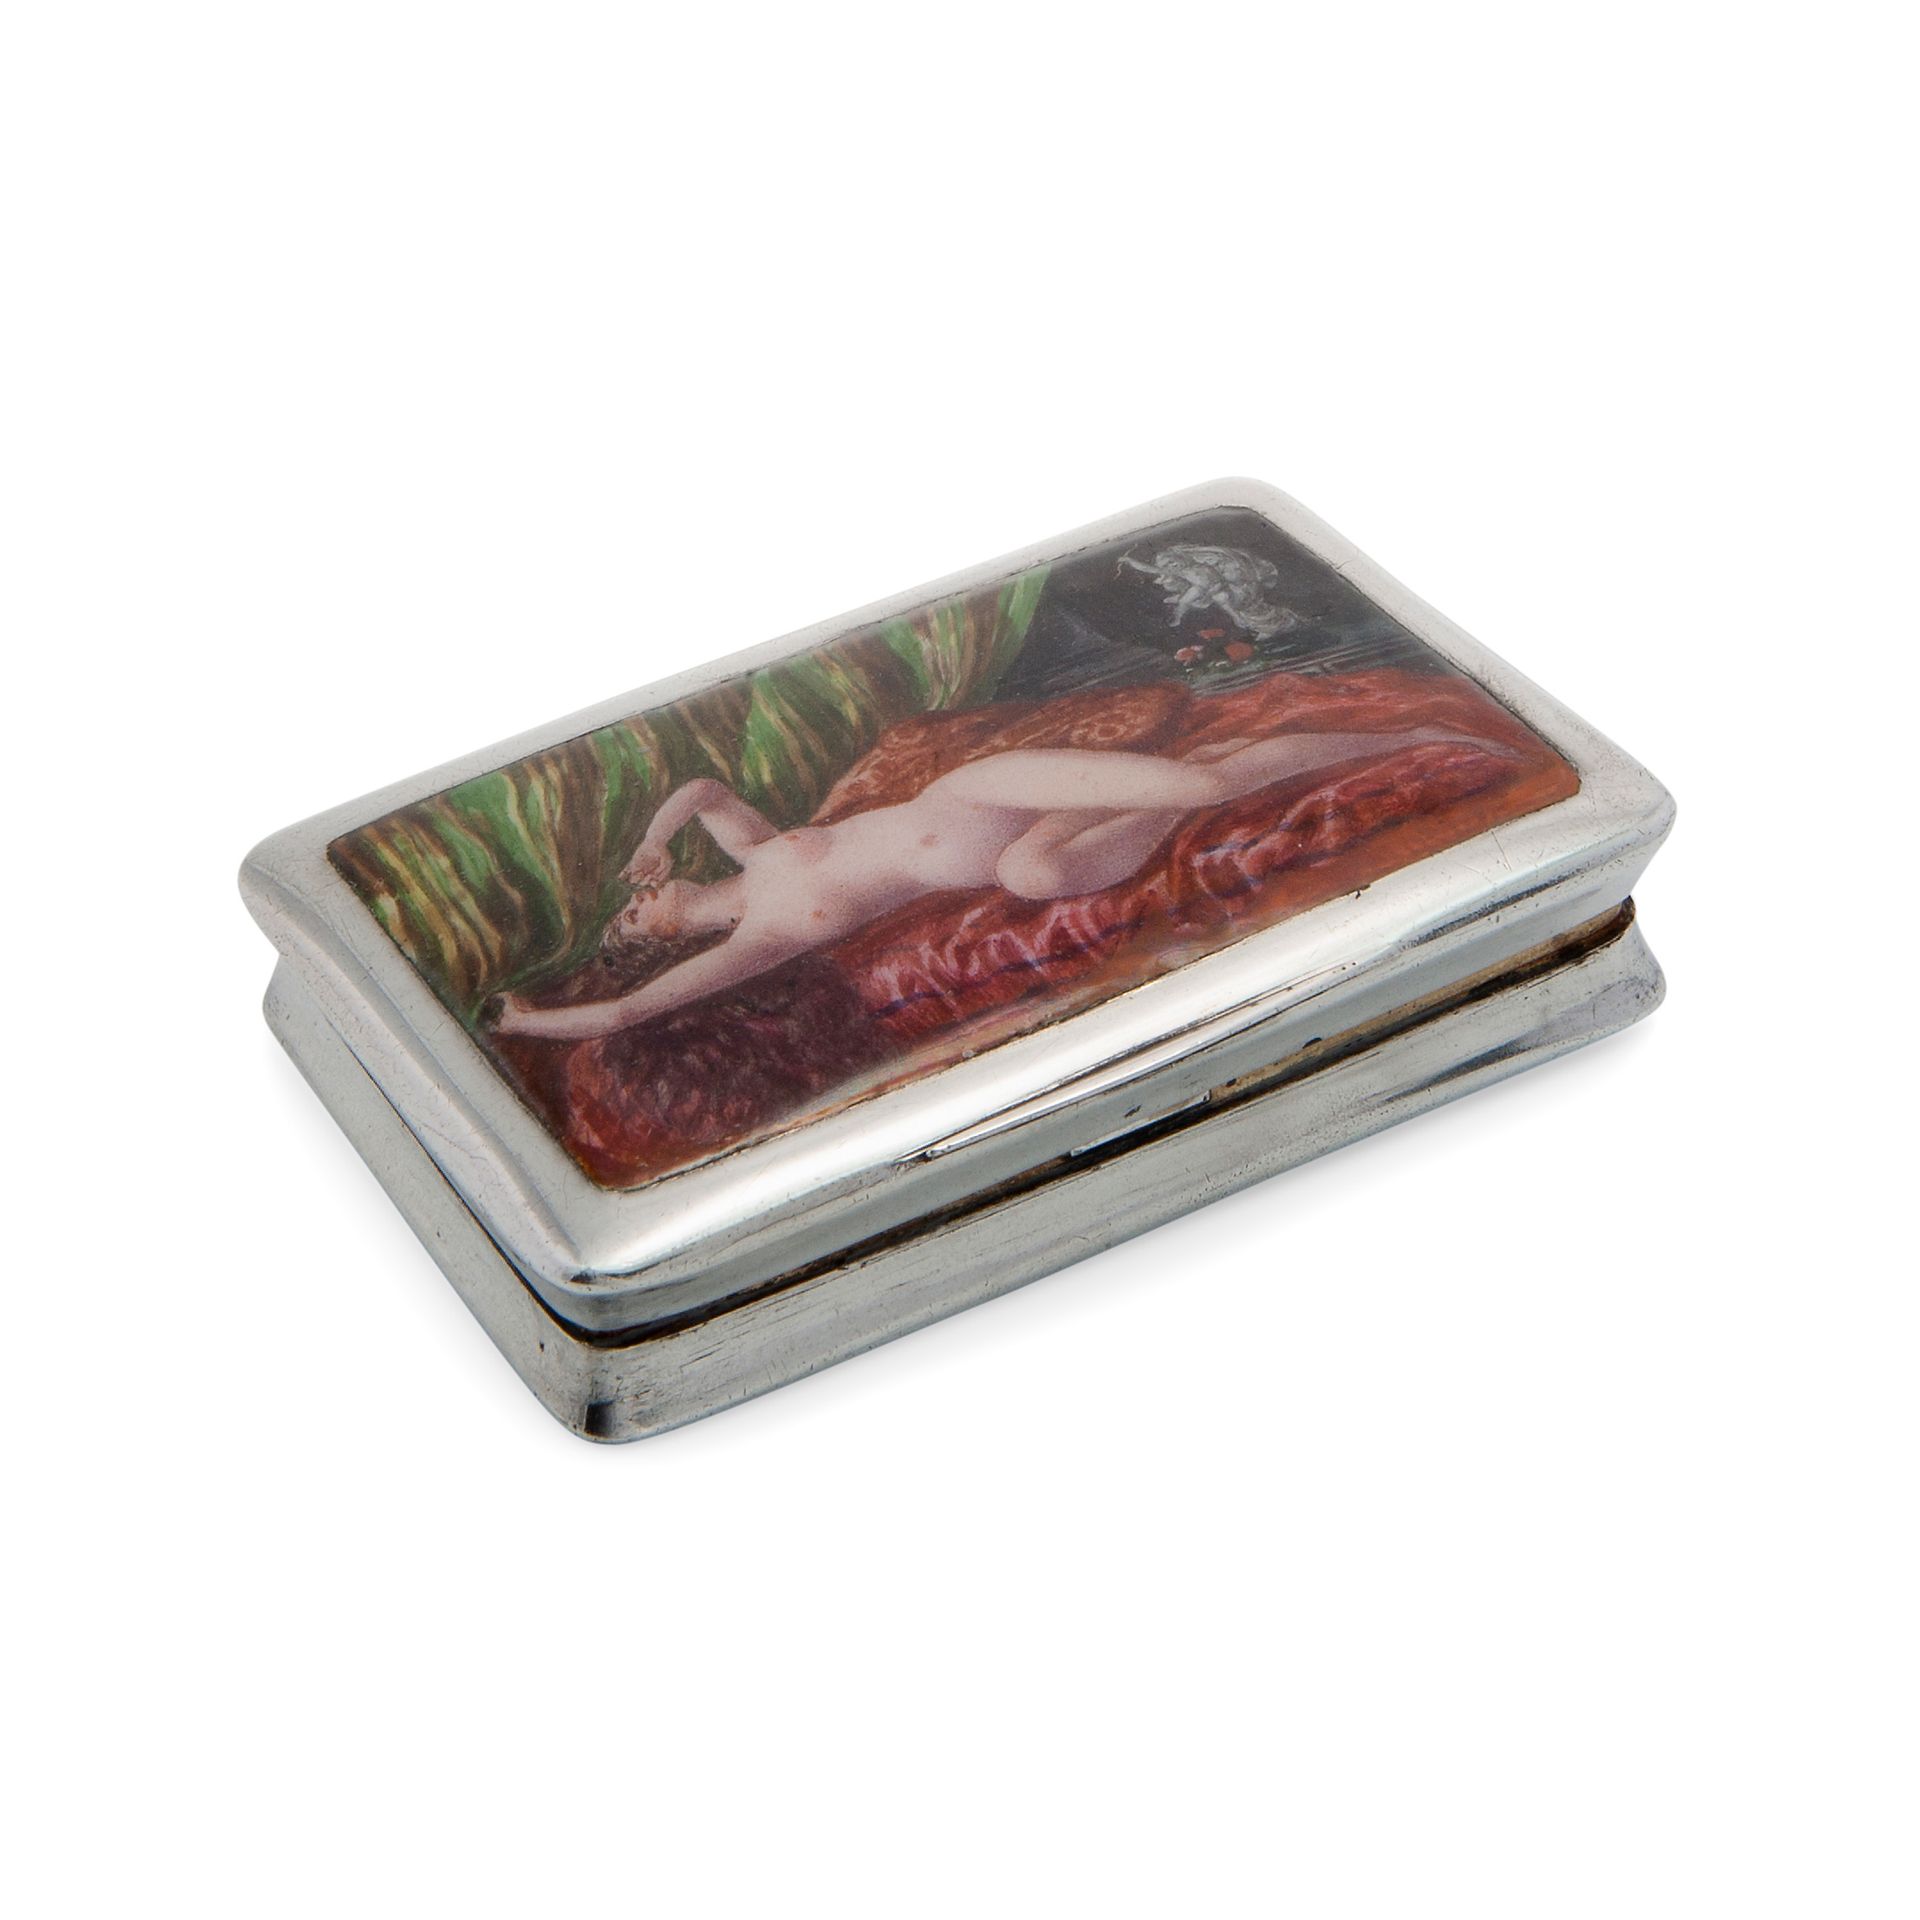 Snuff box with nude in a bedroom, 20th century European manufacture 以带标记的银和珐琅制造，&hellip;